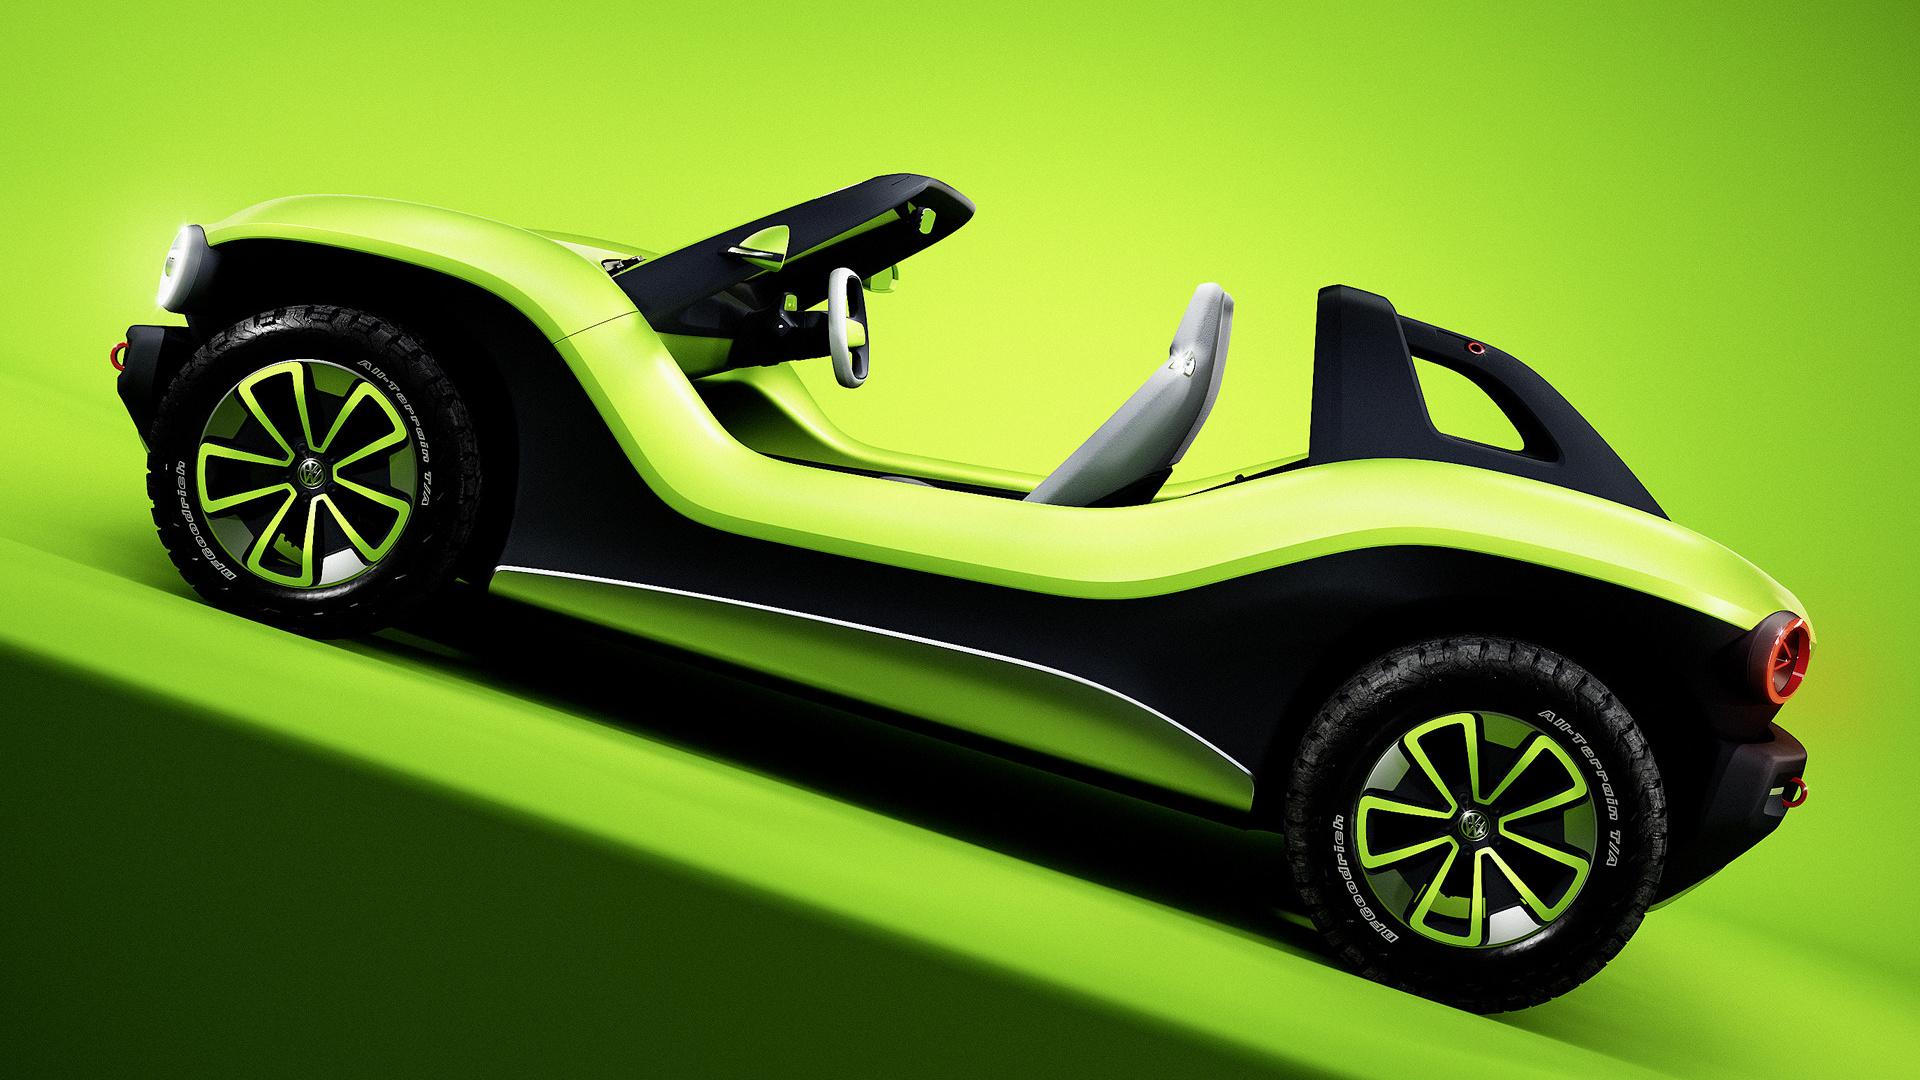 Volkswagen I.D. Buggy Concept and HD Image. Car